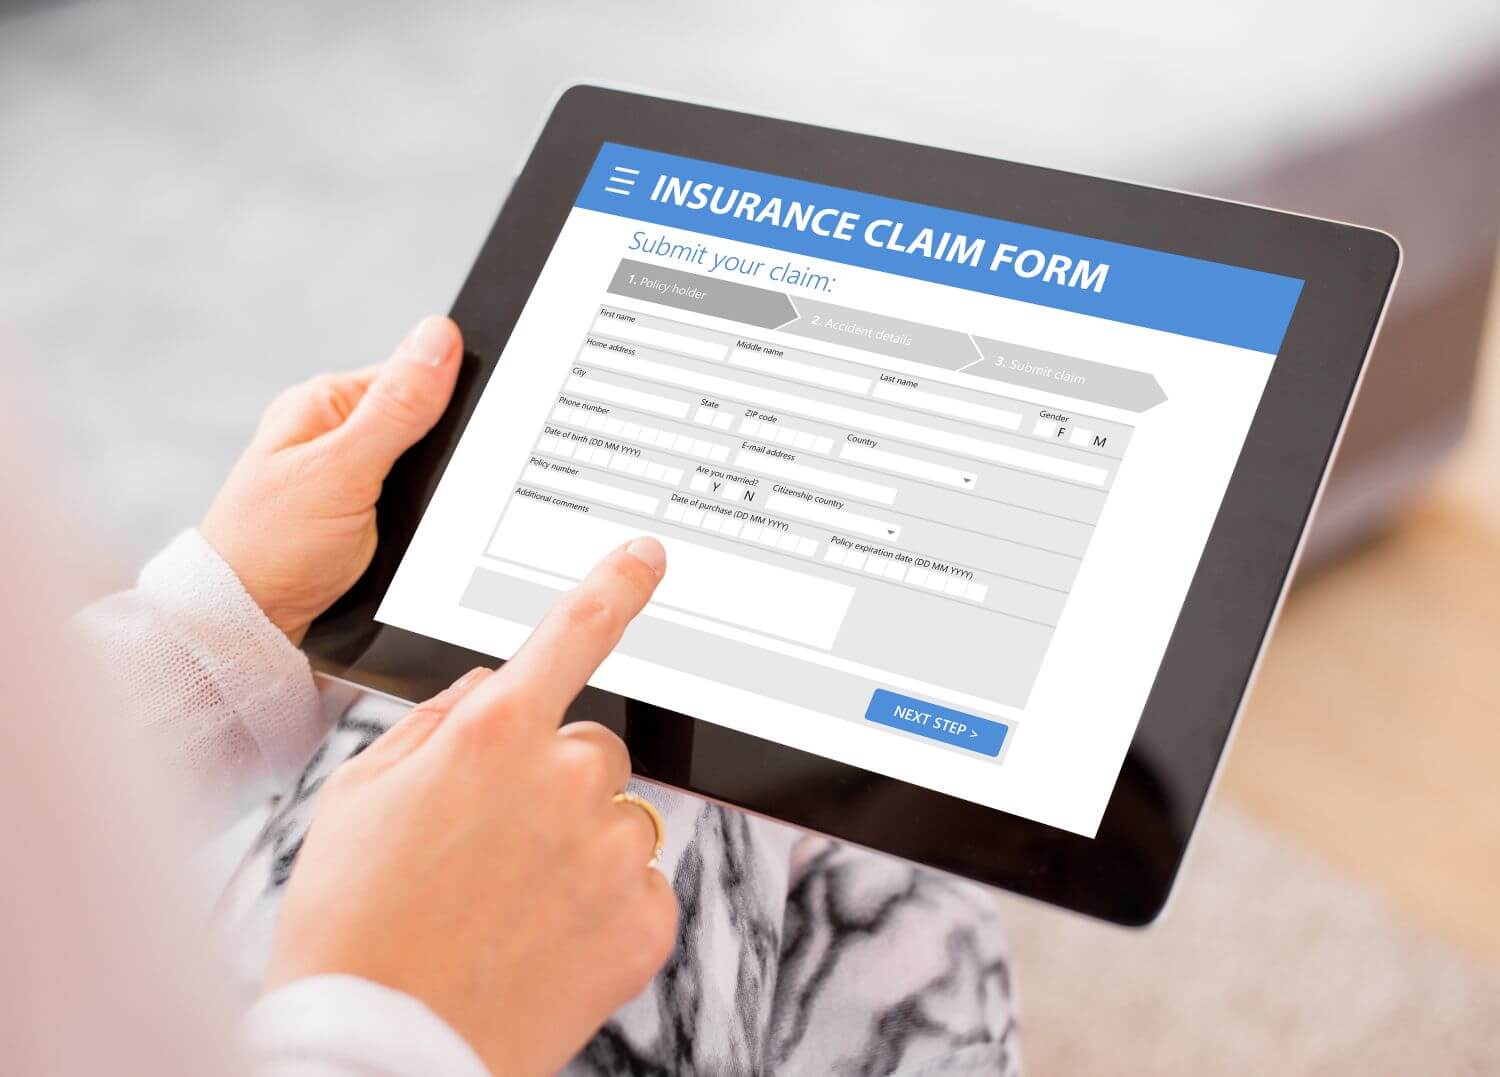 Roof Insurance Claim: What To Expect if You Need to File One